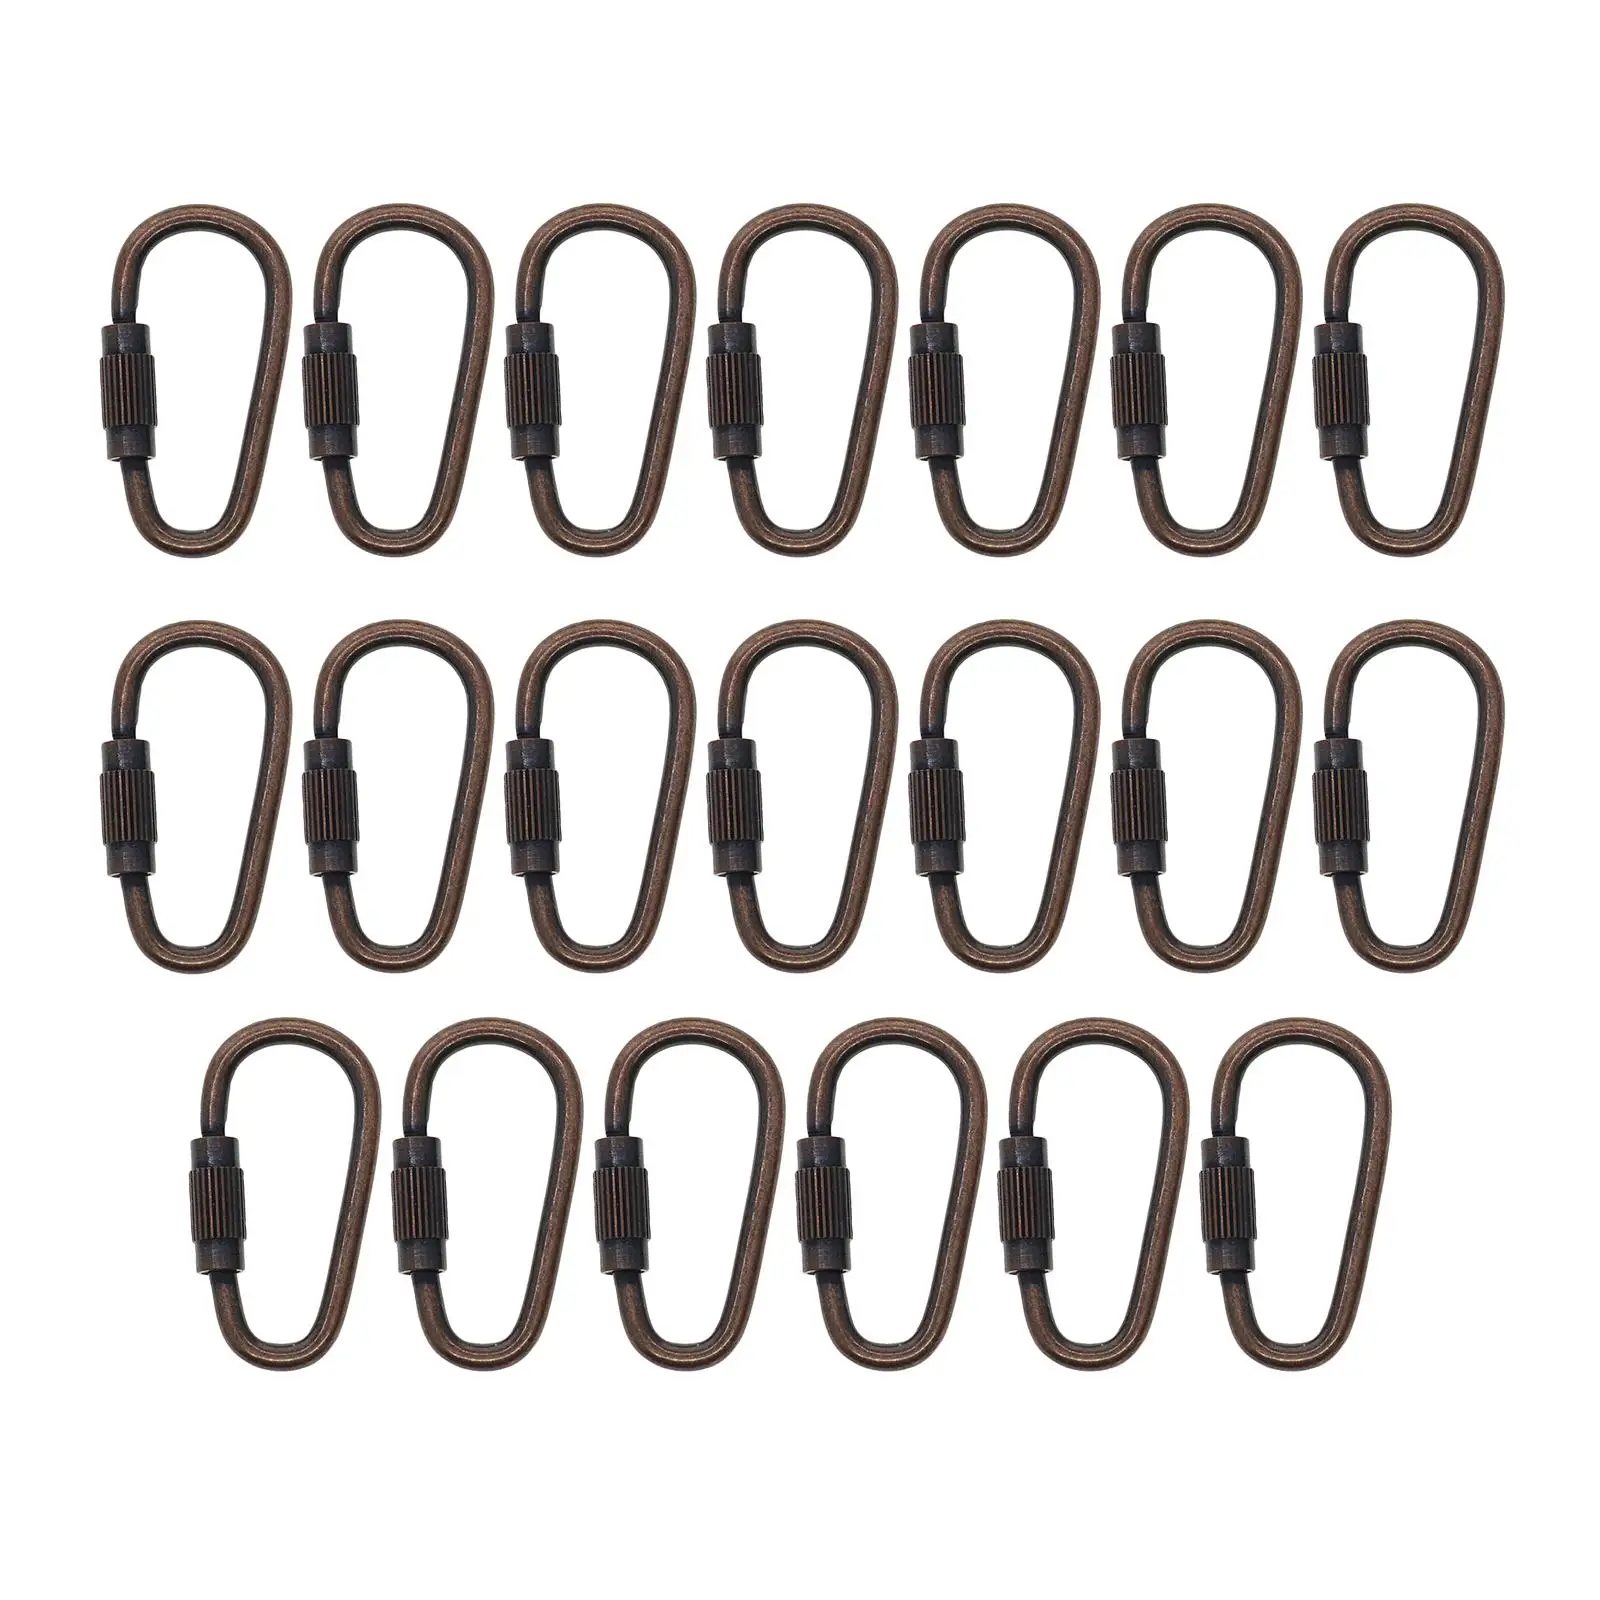 20Pcs Small Keychain Carabiner Clips Keychain Clips Durable Lightweight D Ring